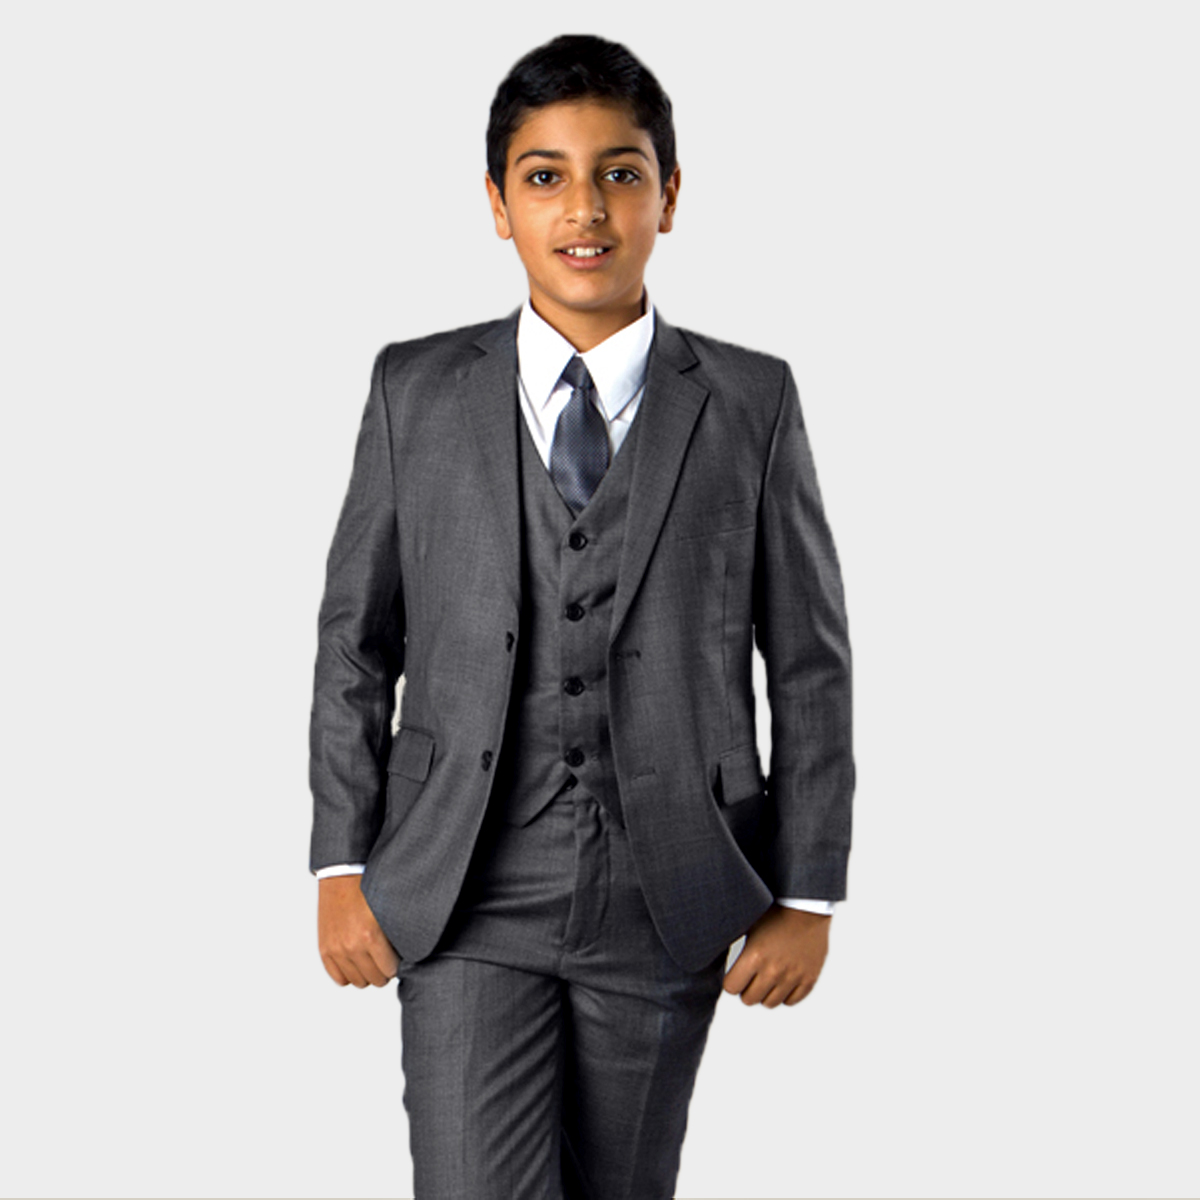 Boys Purchase Suits | Tuxedo Rental, Suits and Formalwear